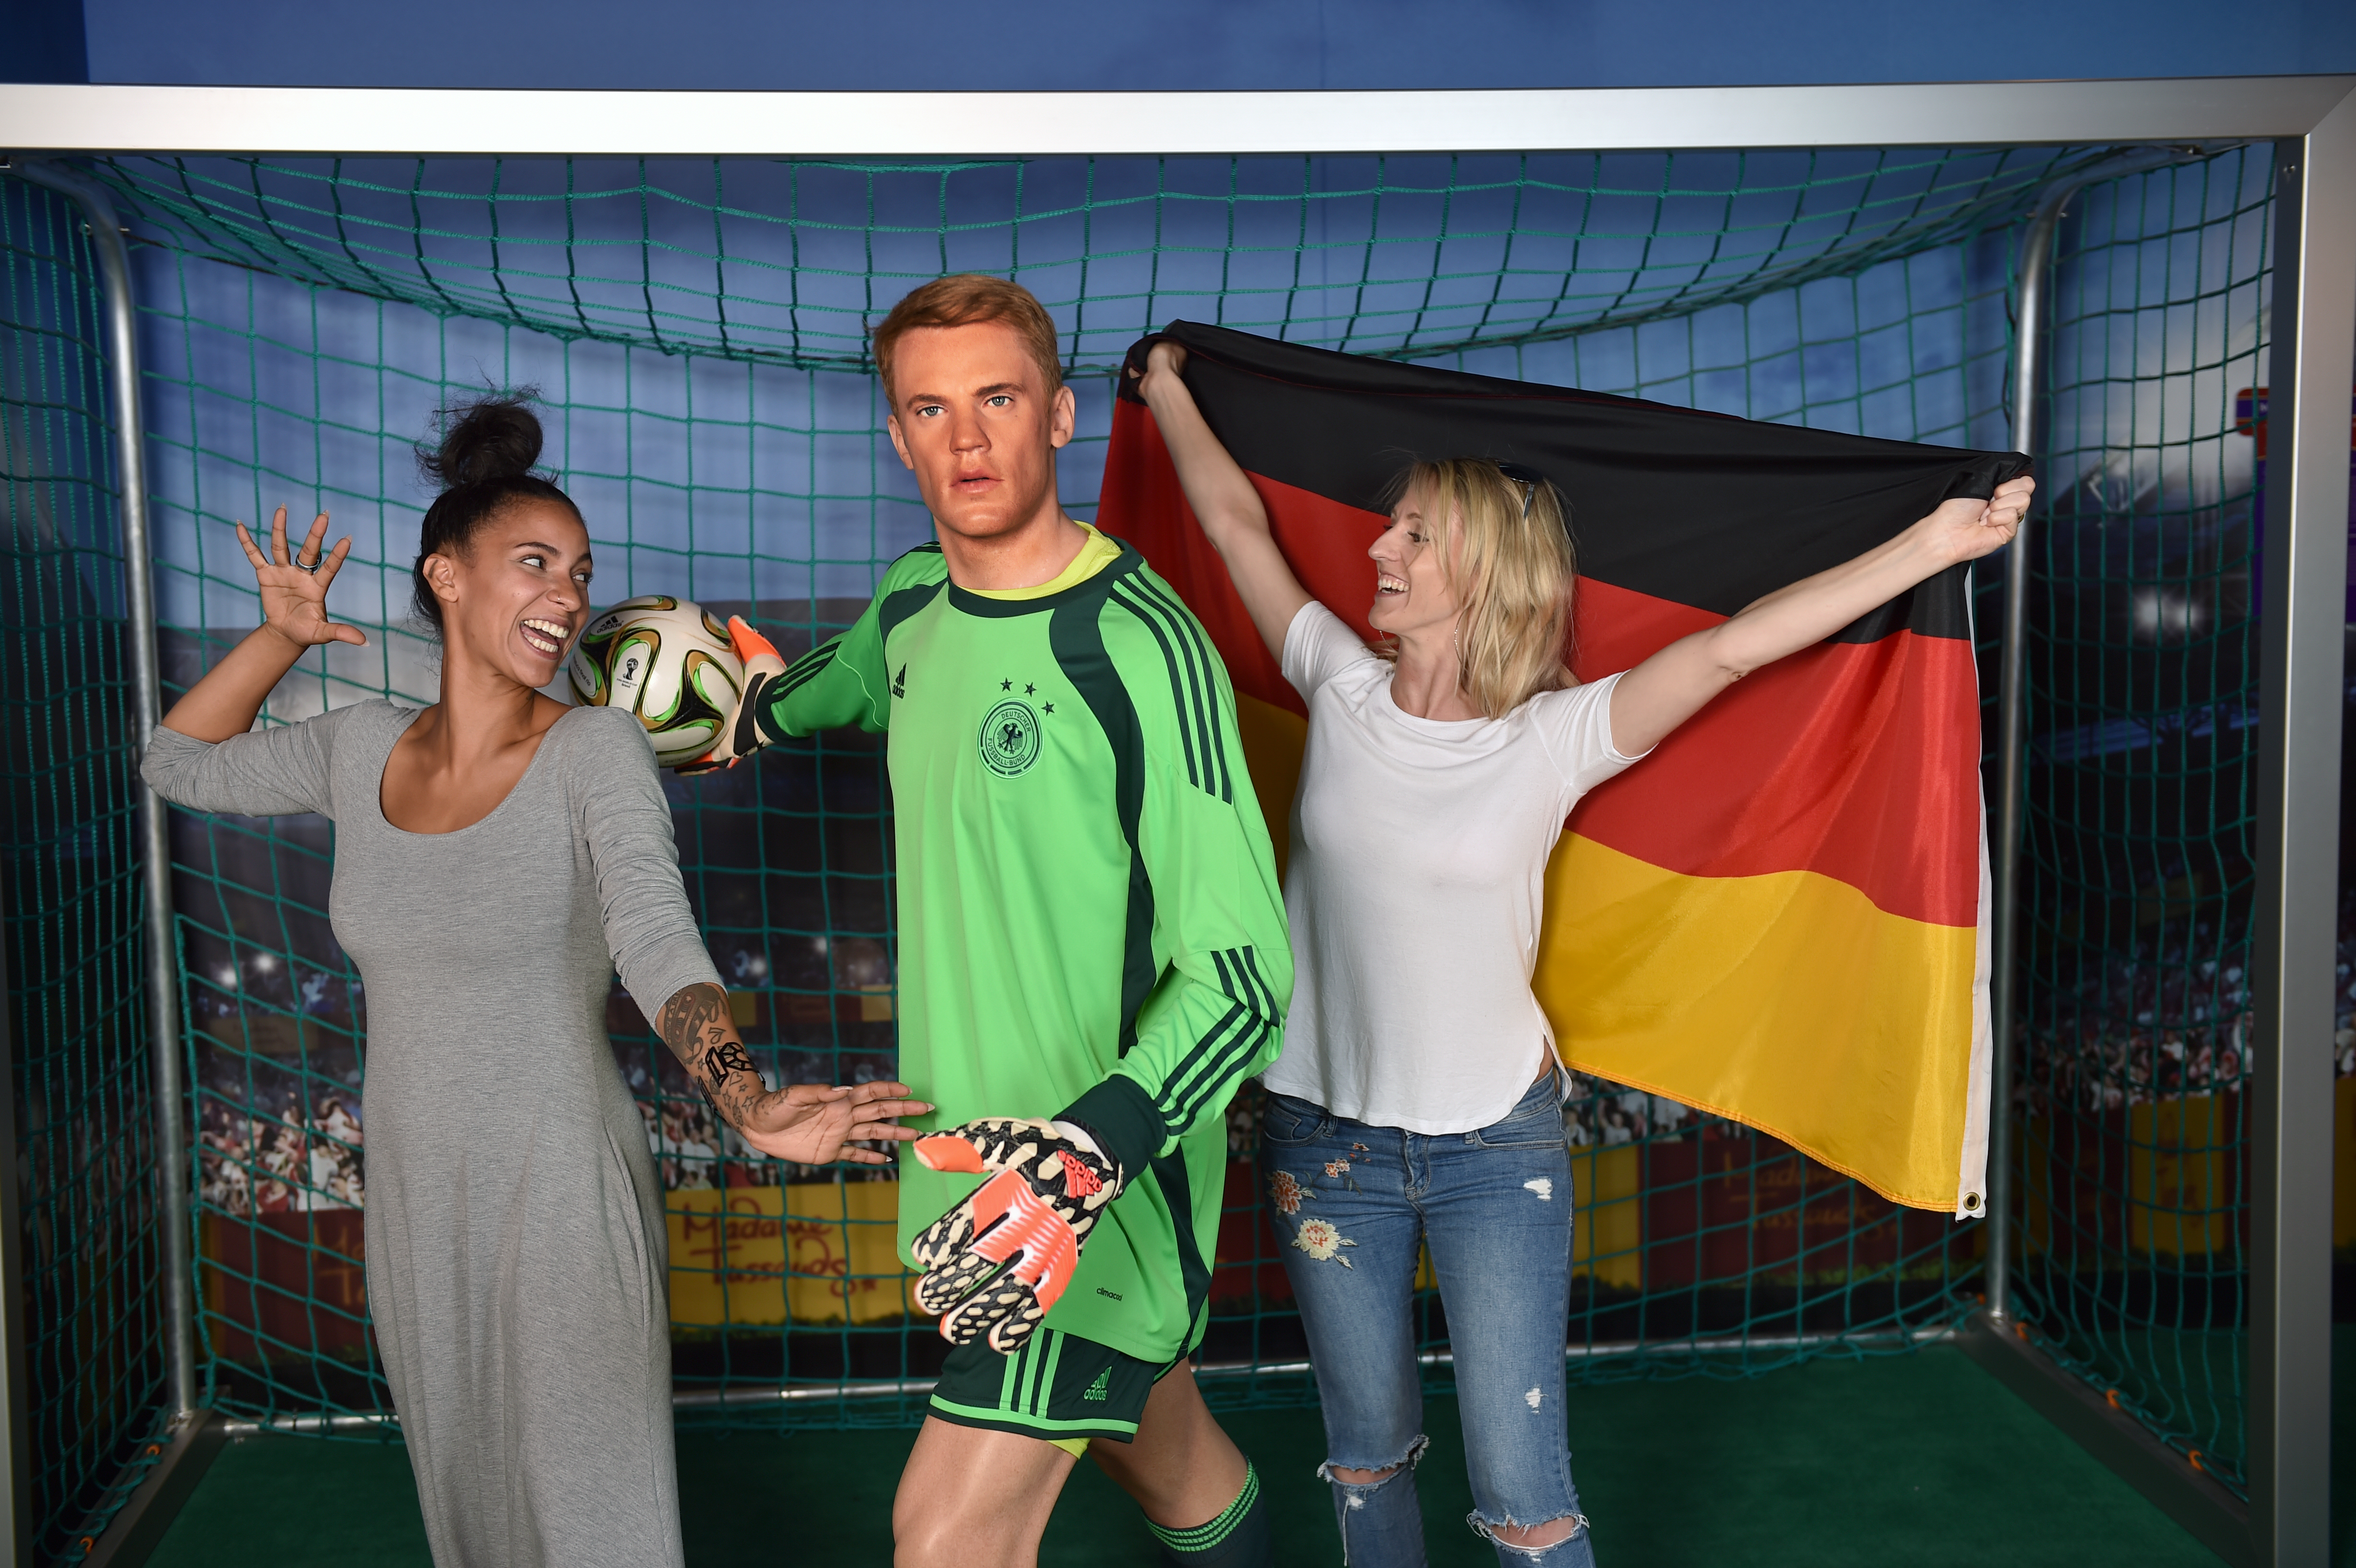 Celebrate a soccer party with Manuel Neuer at Madame Tussauds Berlin